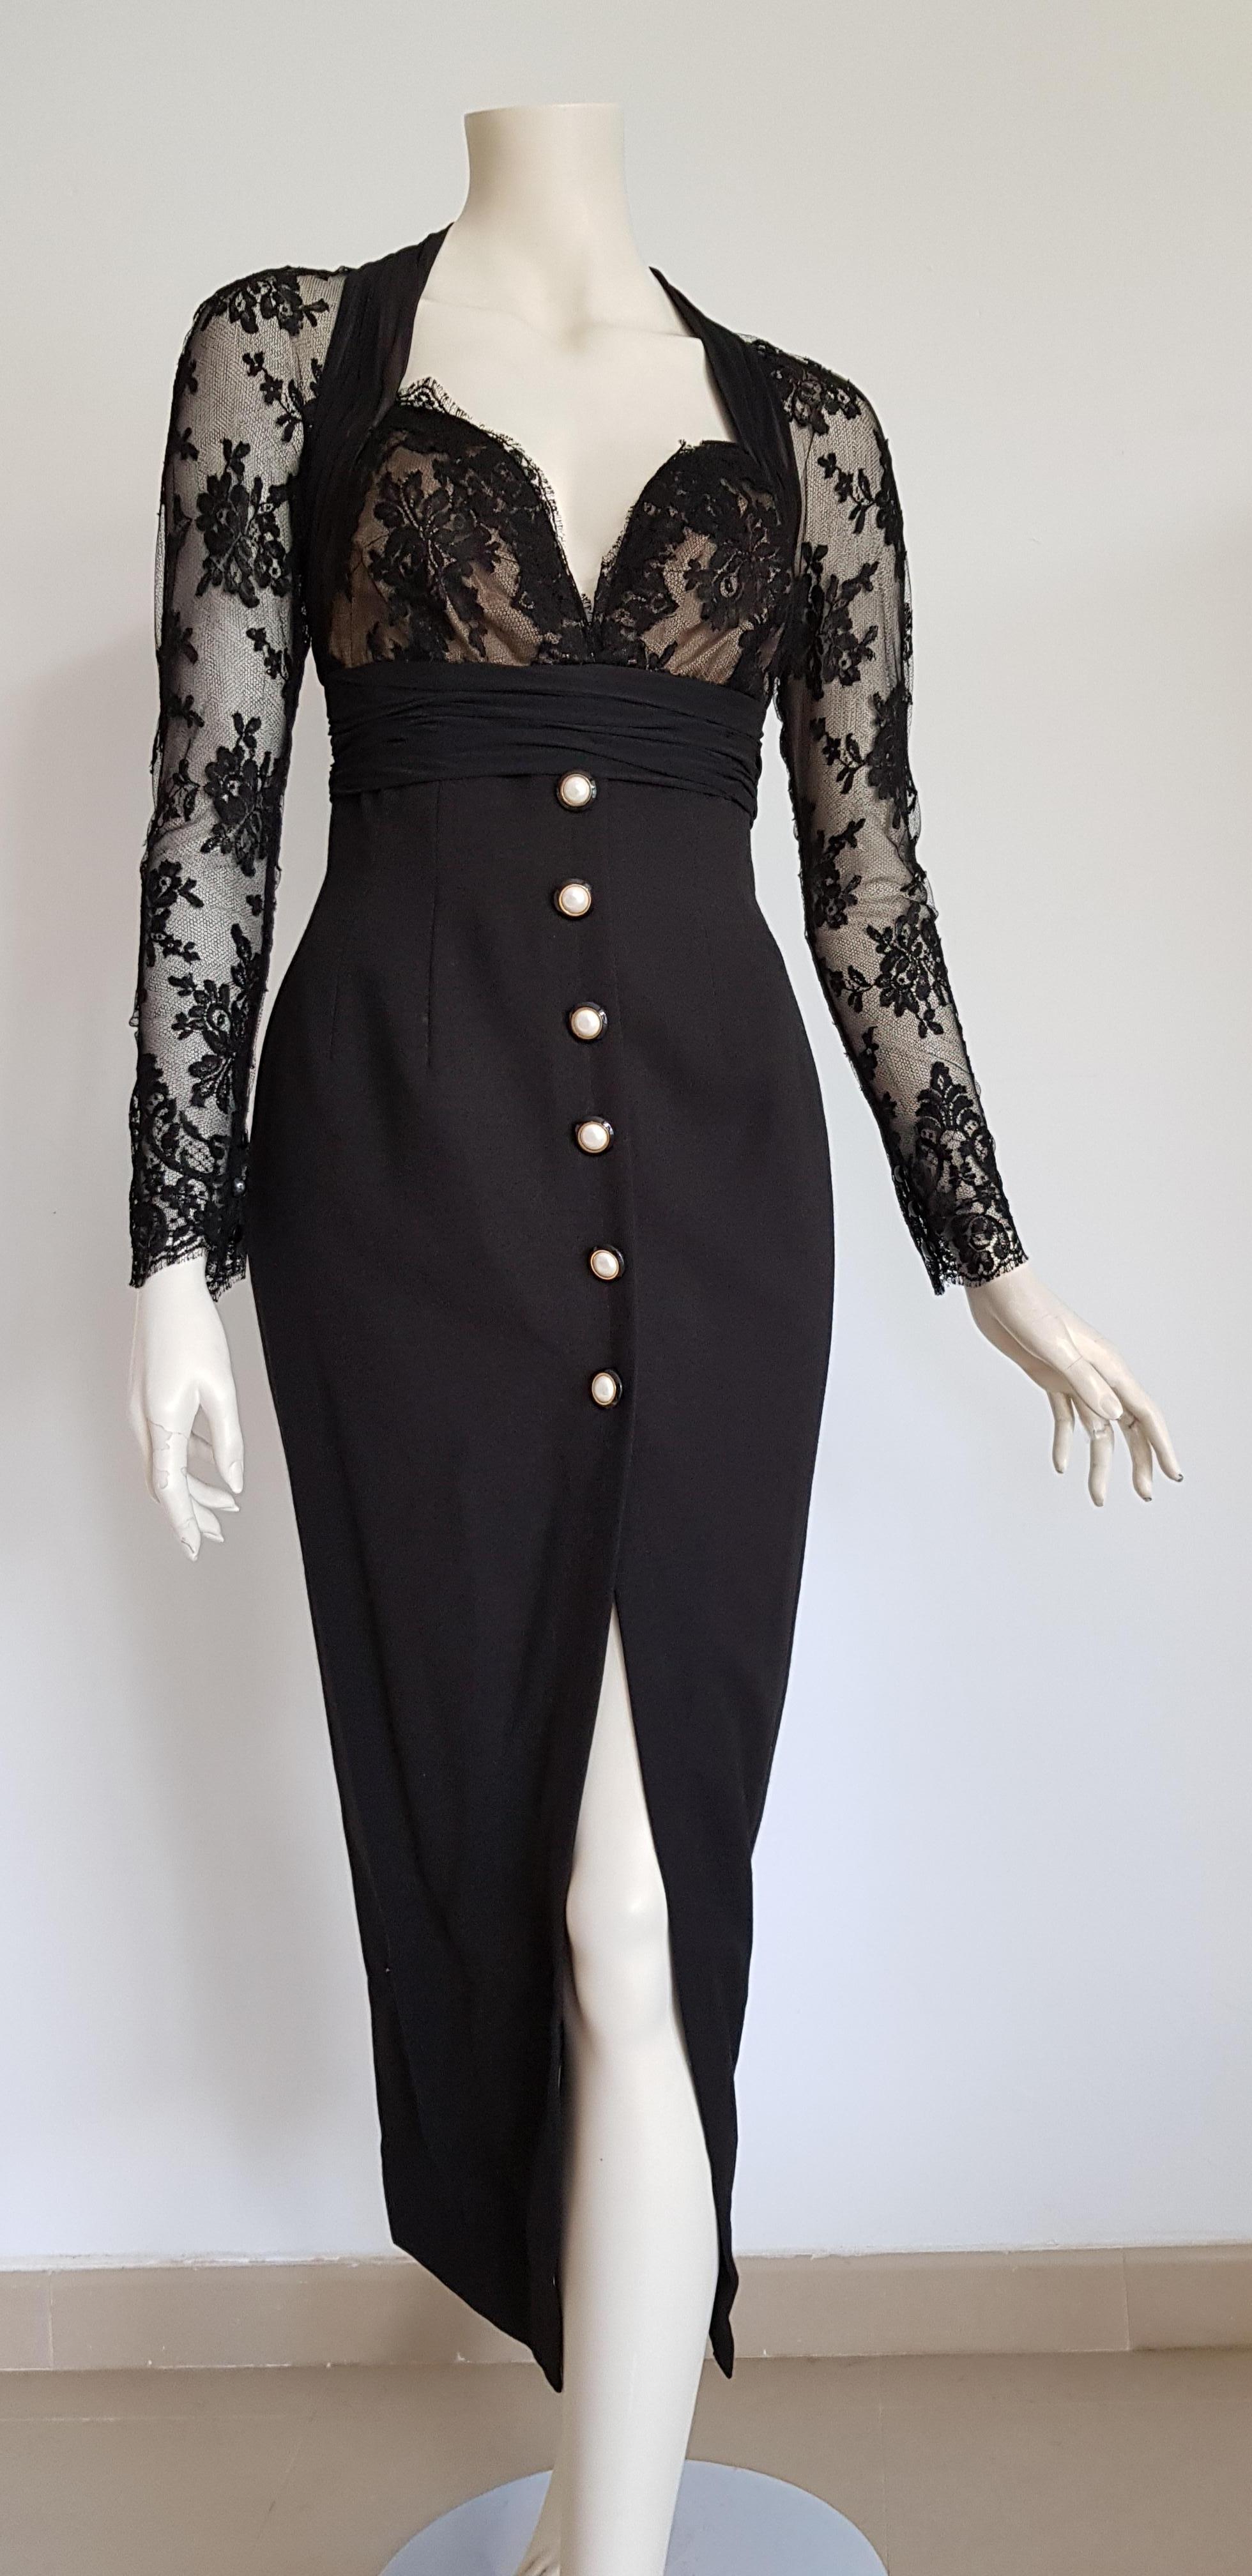 Isabelle ALLARD Paris sleeves chest shoulders lace, 6 front pearl buttons, silk wool black dress - Unworn, New.

Isabelle ALLARD is a fashion designer who created only haute couture and selling to international customers too. It did not produce